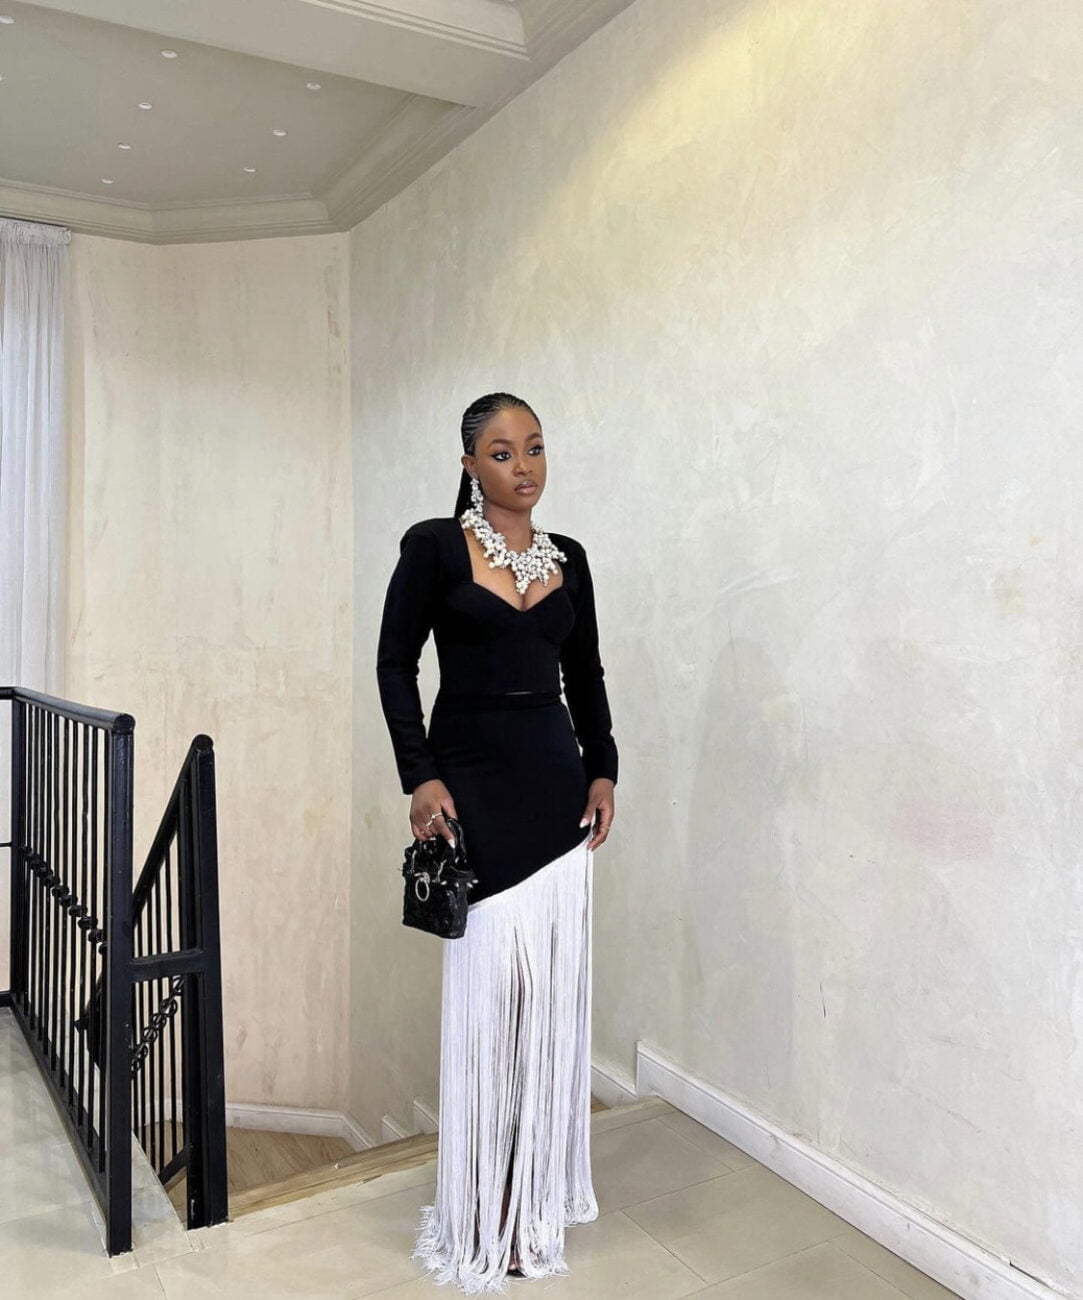 Bella Okagbue in a stunning black and white dress.